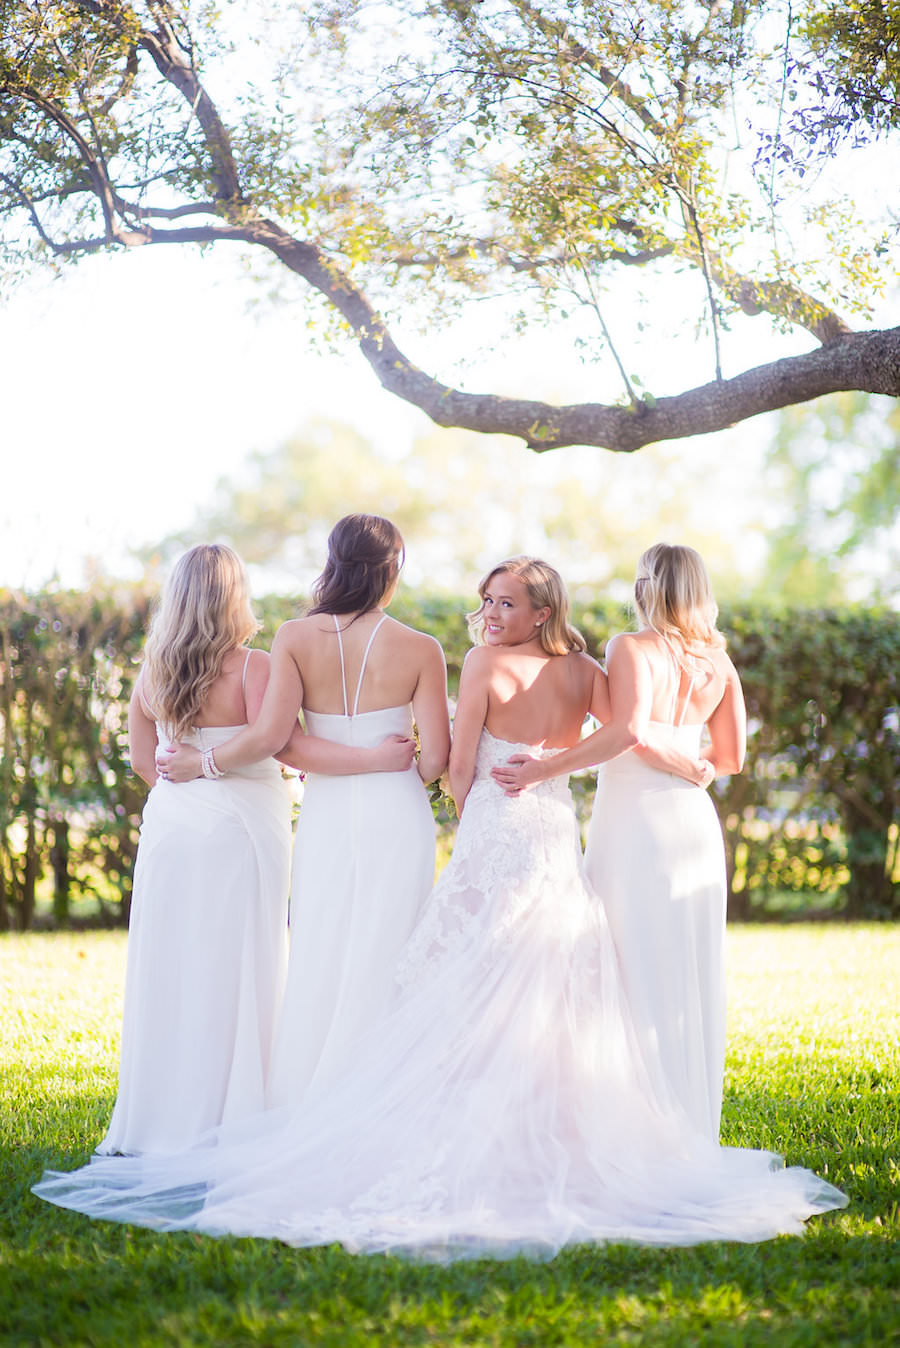 Bridal Party Wedding Portrait in Ivory Hayley Paige Bridesmaids Dresses and Ivory Lace and Tulle Alvina Valenta Wedding Dress | Tampa Wedding Photographer Kera Photography